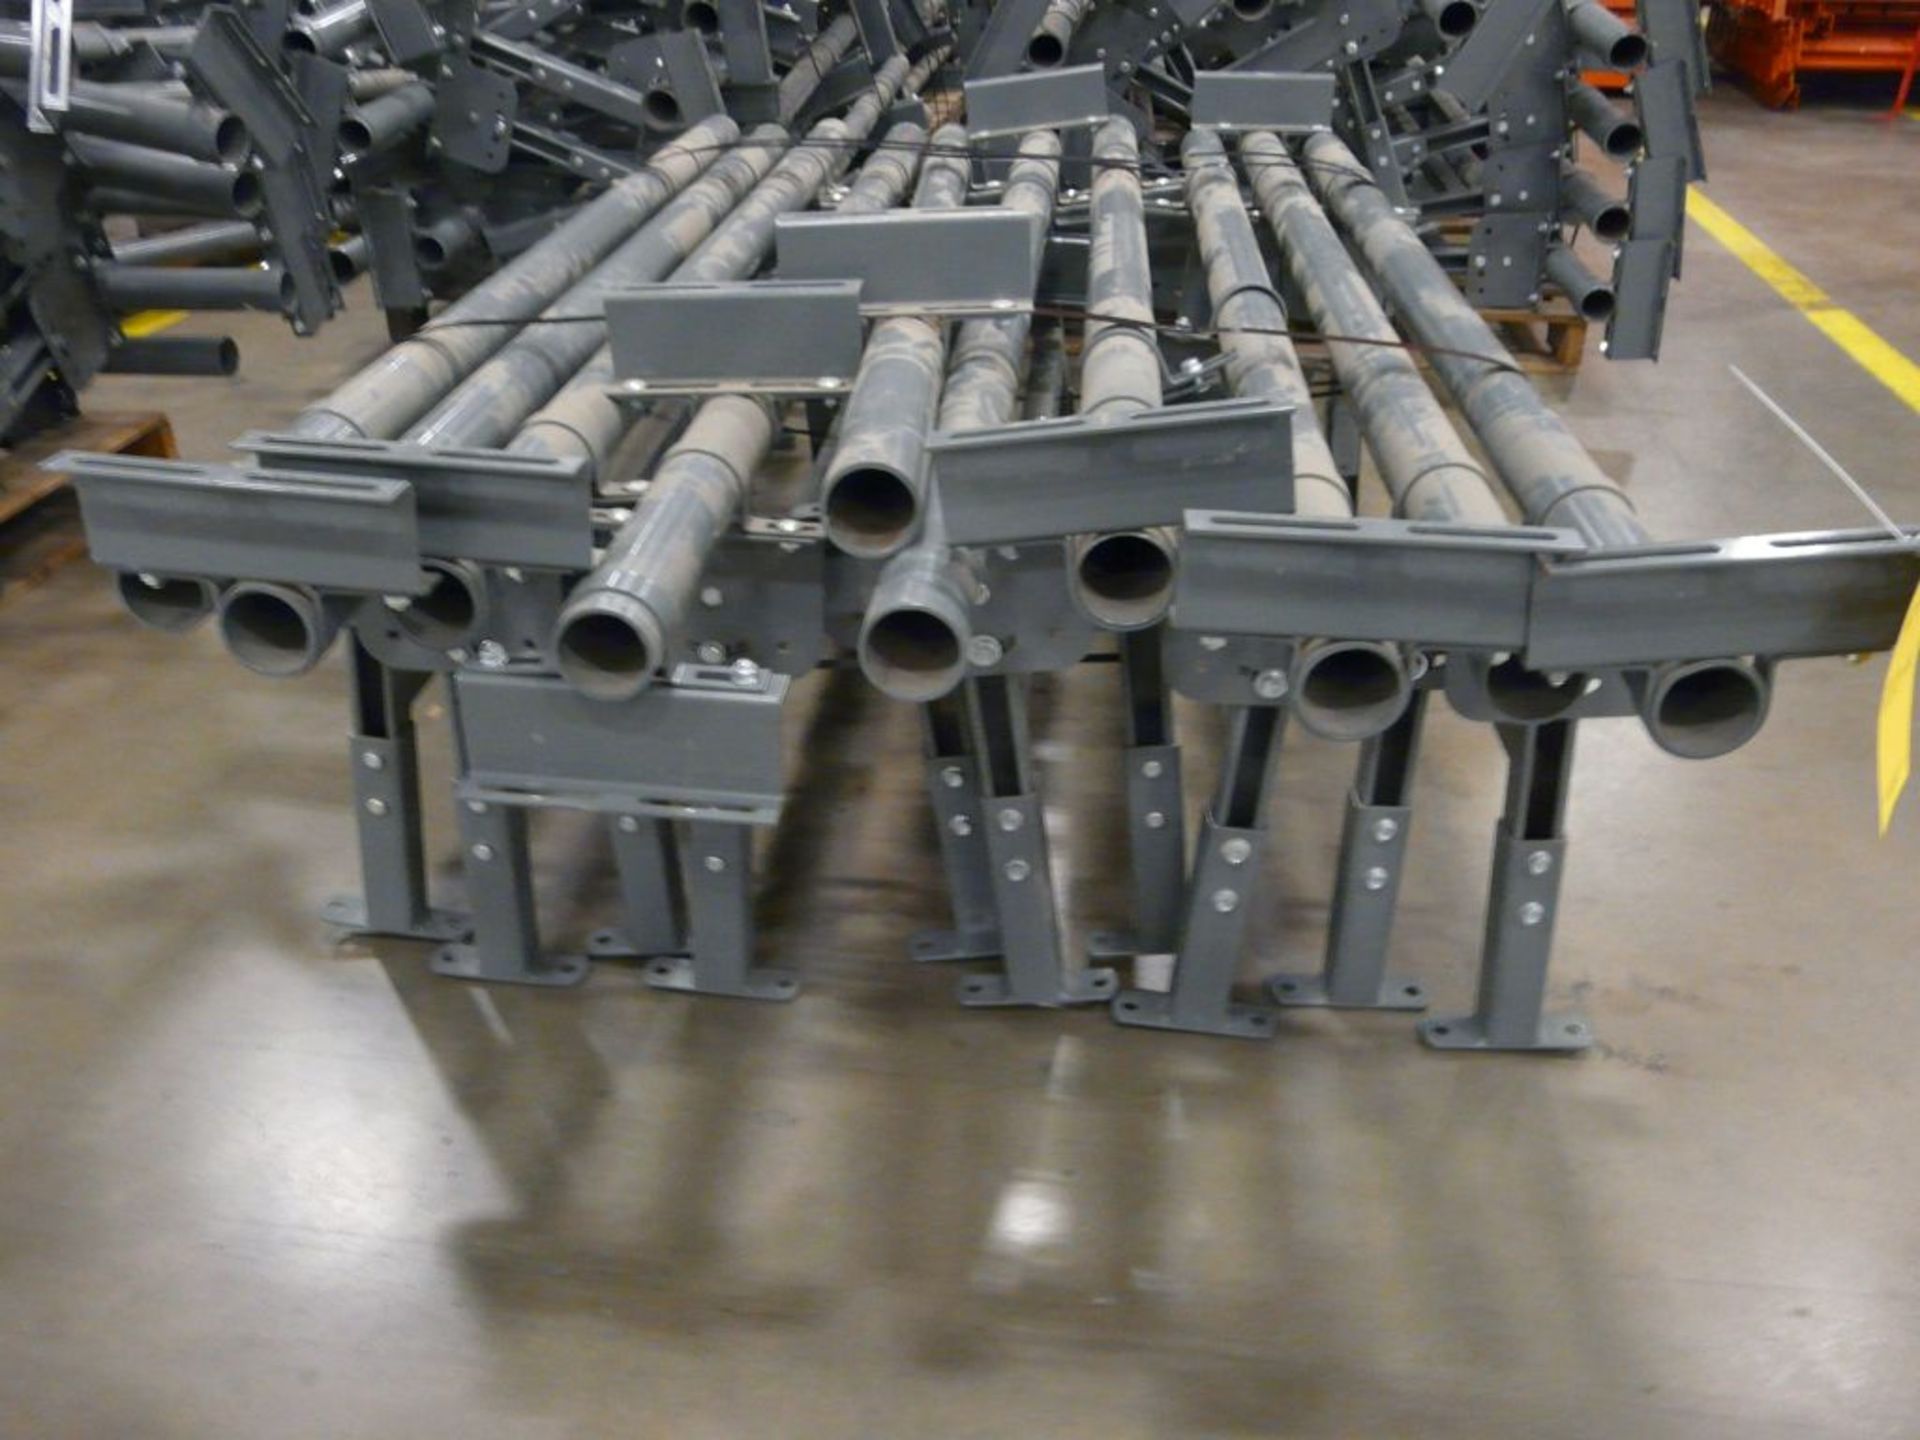 Lot of (10) USA Floor Supports - Brace: 71"L; Stand: 44"L x 19"H; Tag: 223864 - $30 Lot Loading Fee - Image 3 of 4